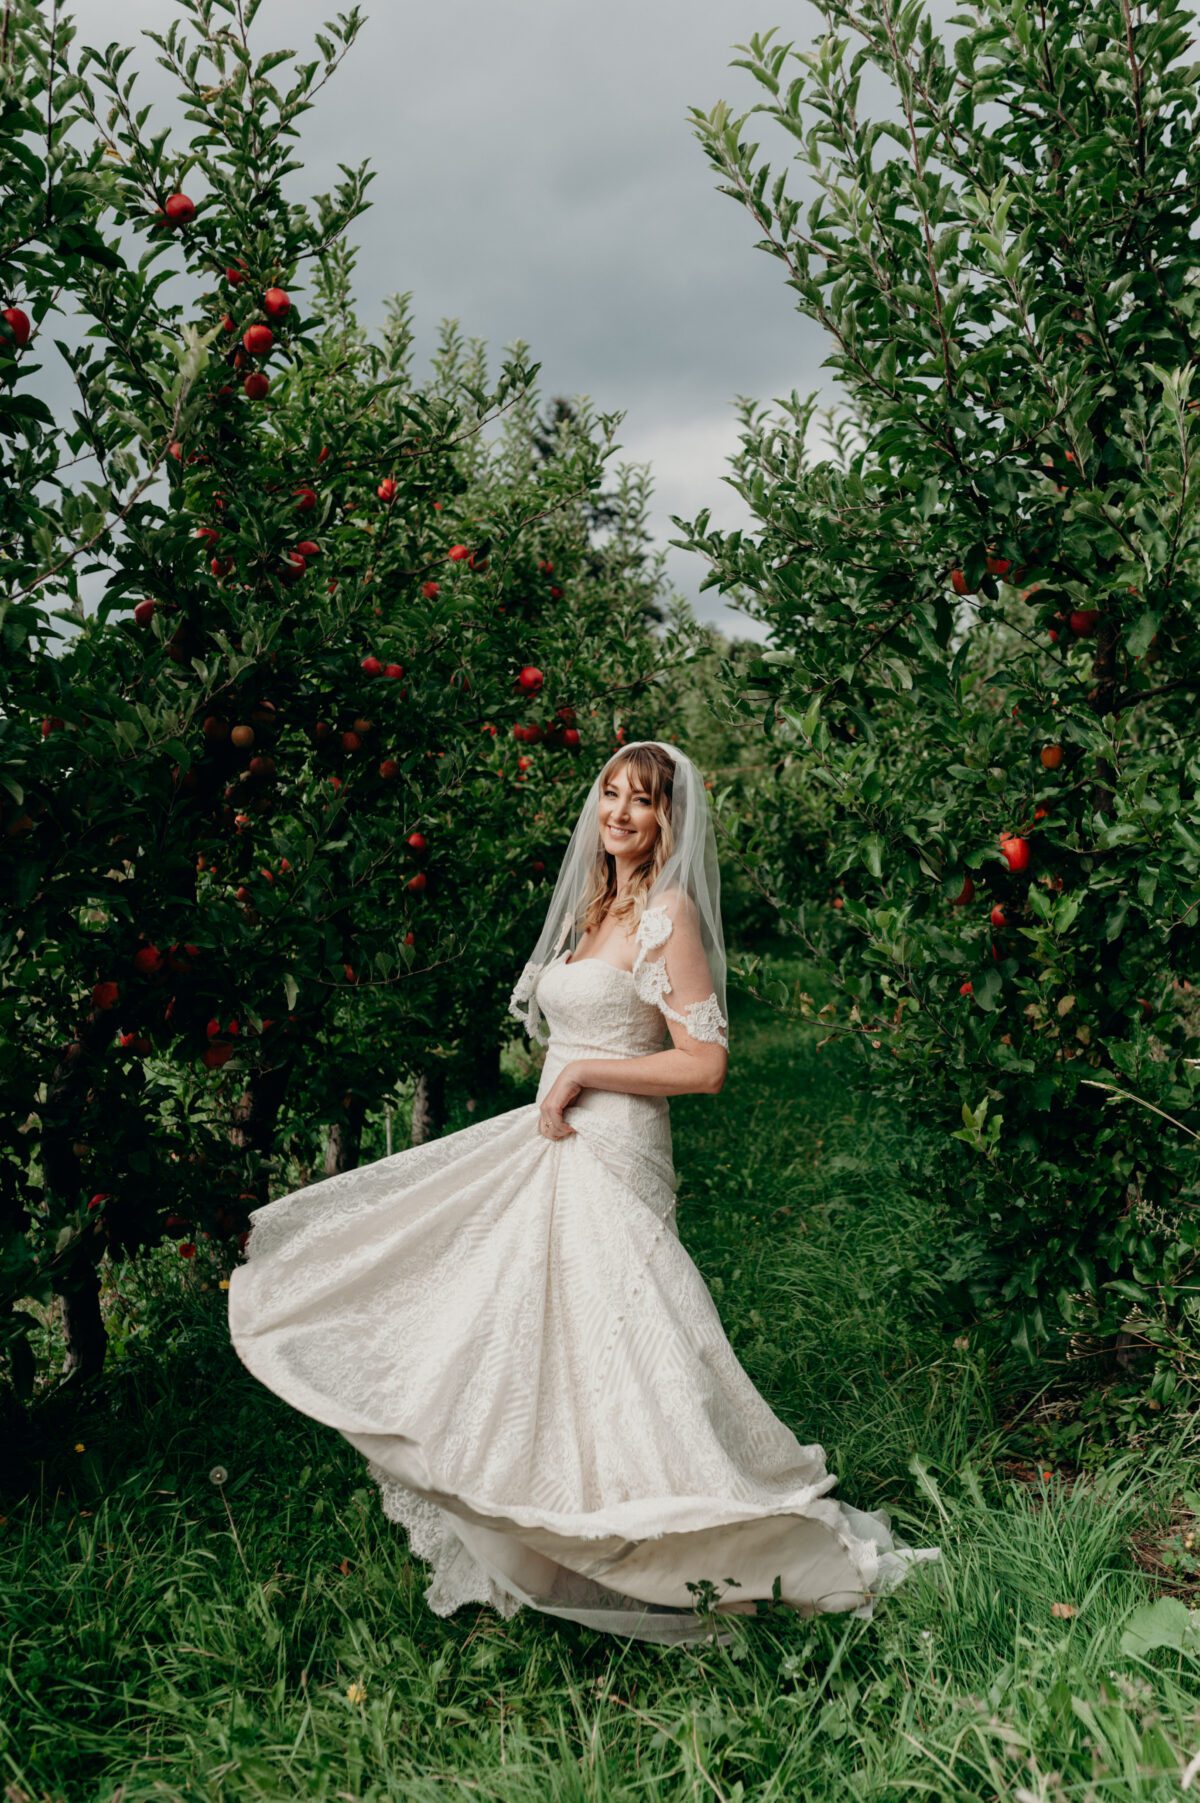 A bride shows off her gown while standing in an apple orchard full of ripe red apples.